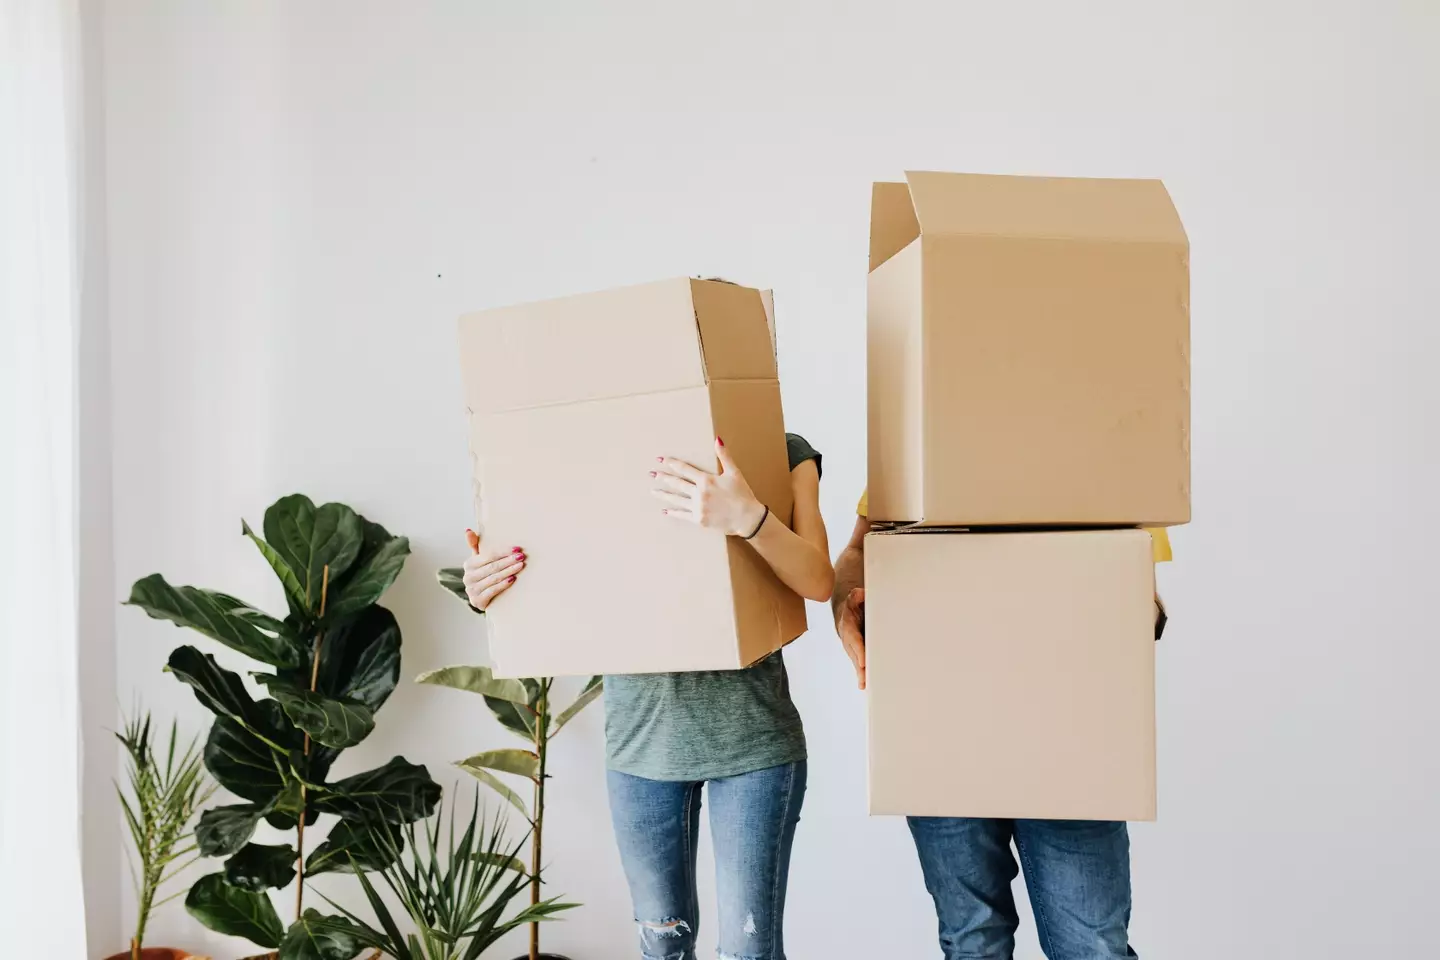 Moving in together can be a big deal, but don't get taken for a ride.